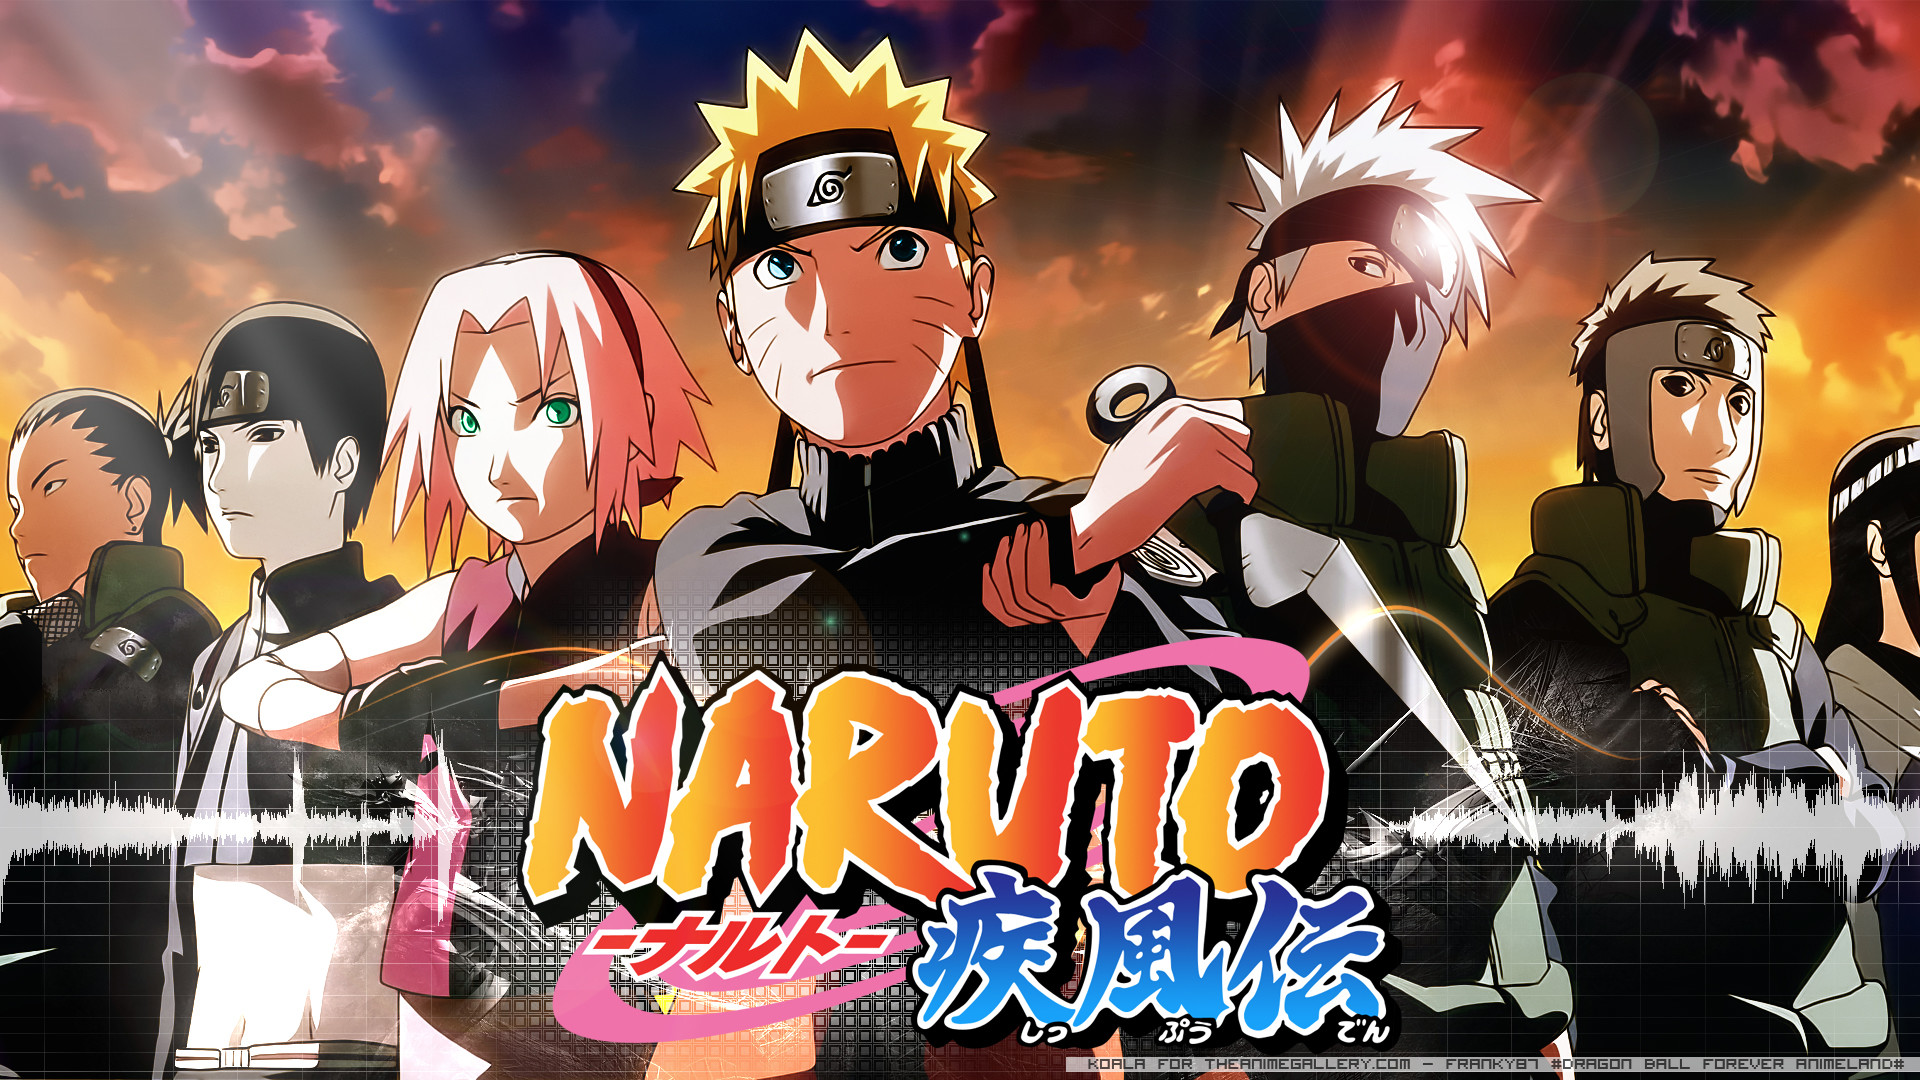 1920x1080 Naruto images naruto anime HD wallpaper and background photos 